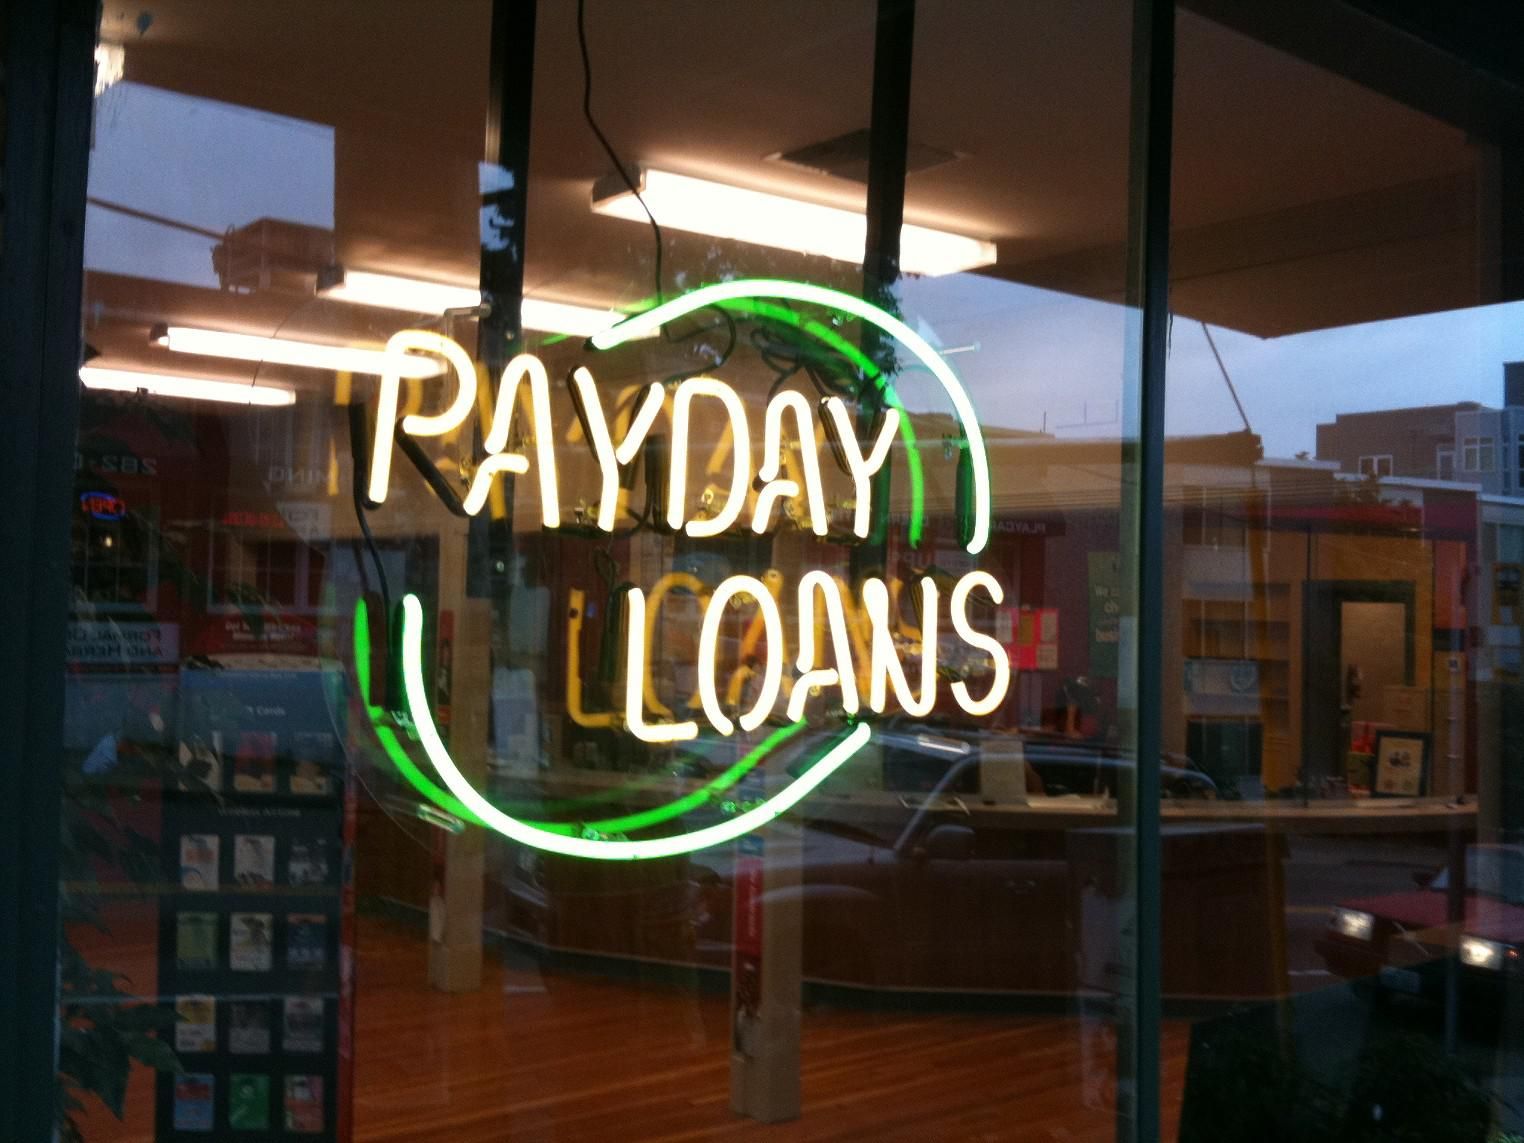 Payday Lending: Protecting Or Exploiting Consumers?